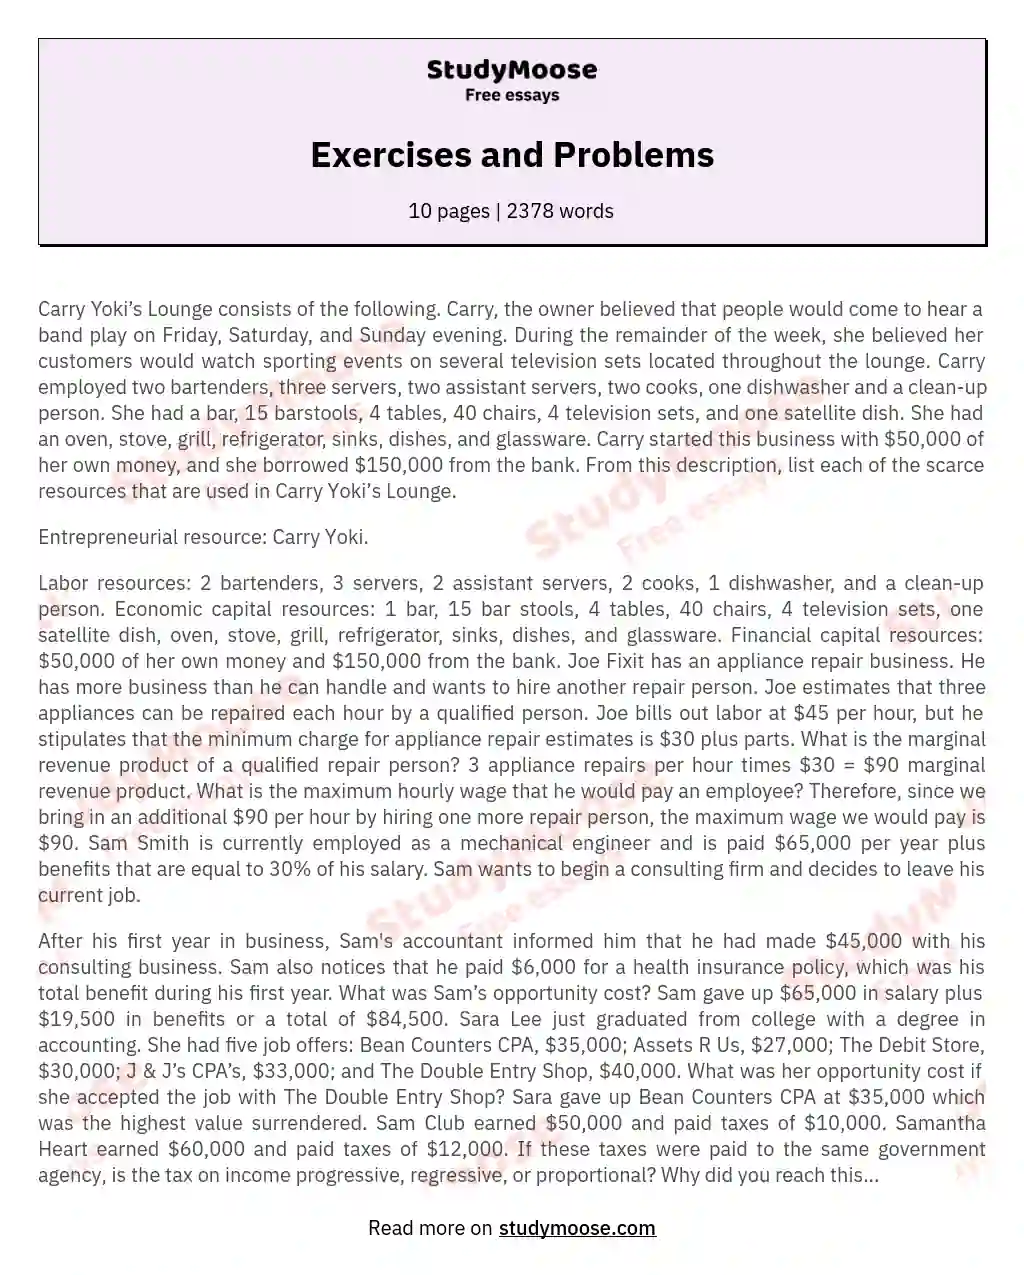 Exercises and Problems essay